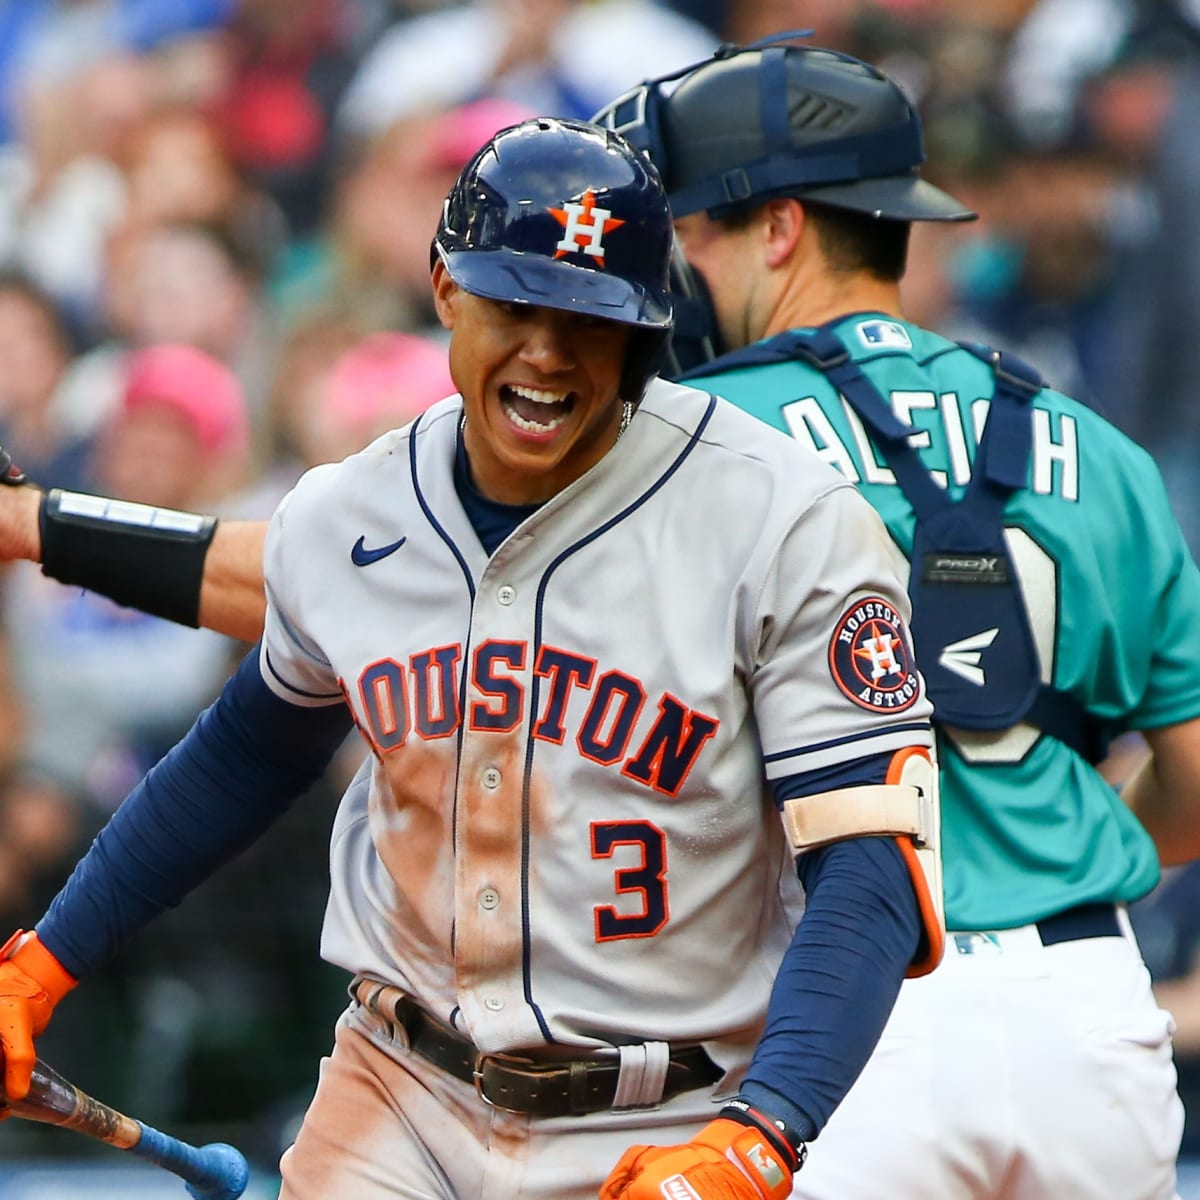 Astros' Jeremy Peña is a star among rookies - Axios Houston